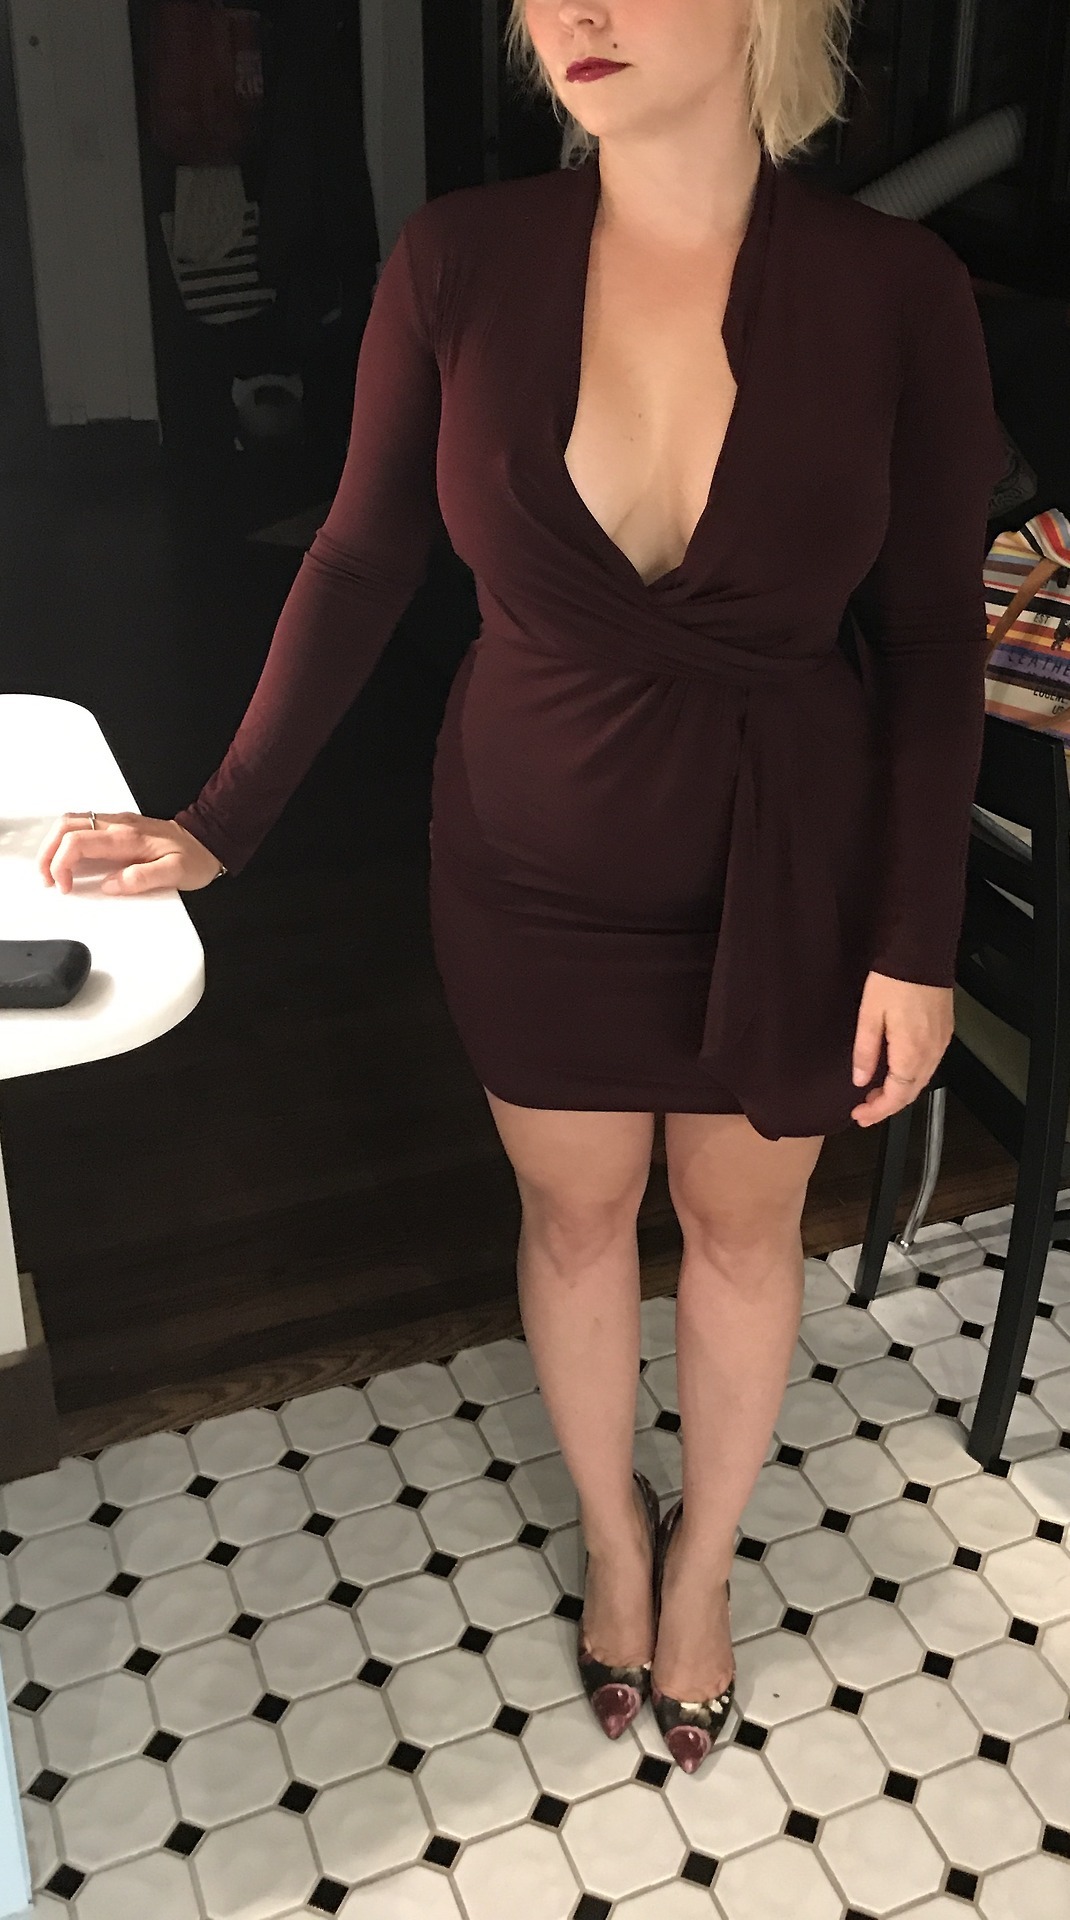 chicagonastygood:High heels and tits in a skin tight dress. We went to the sex toy